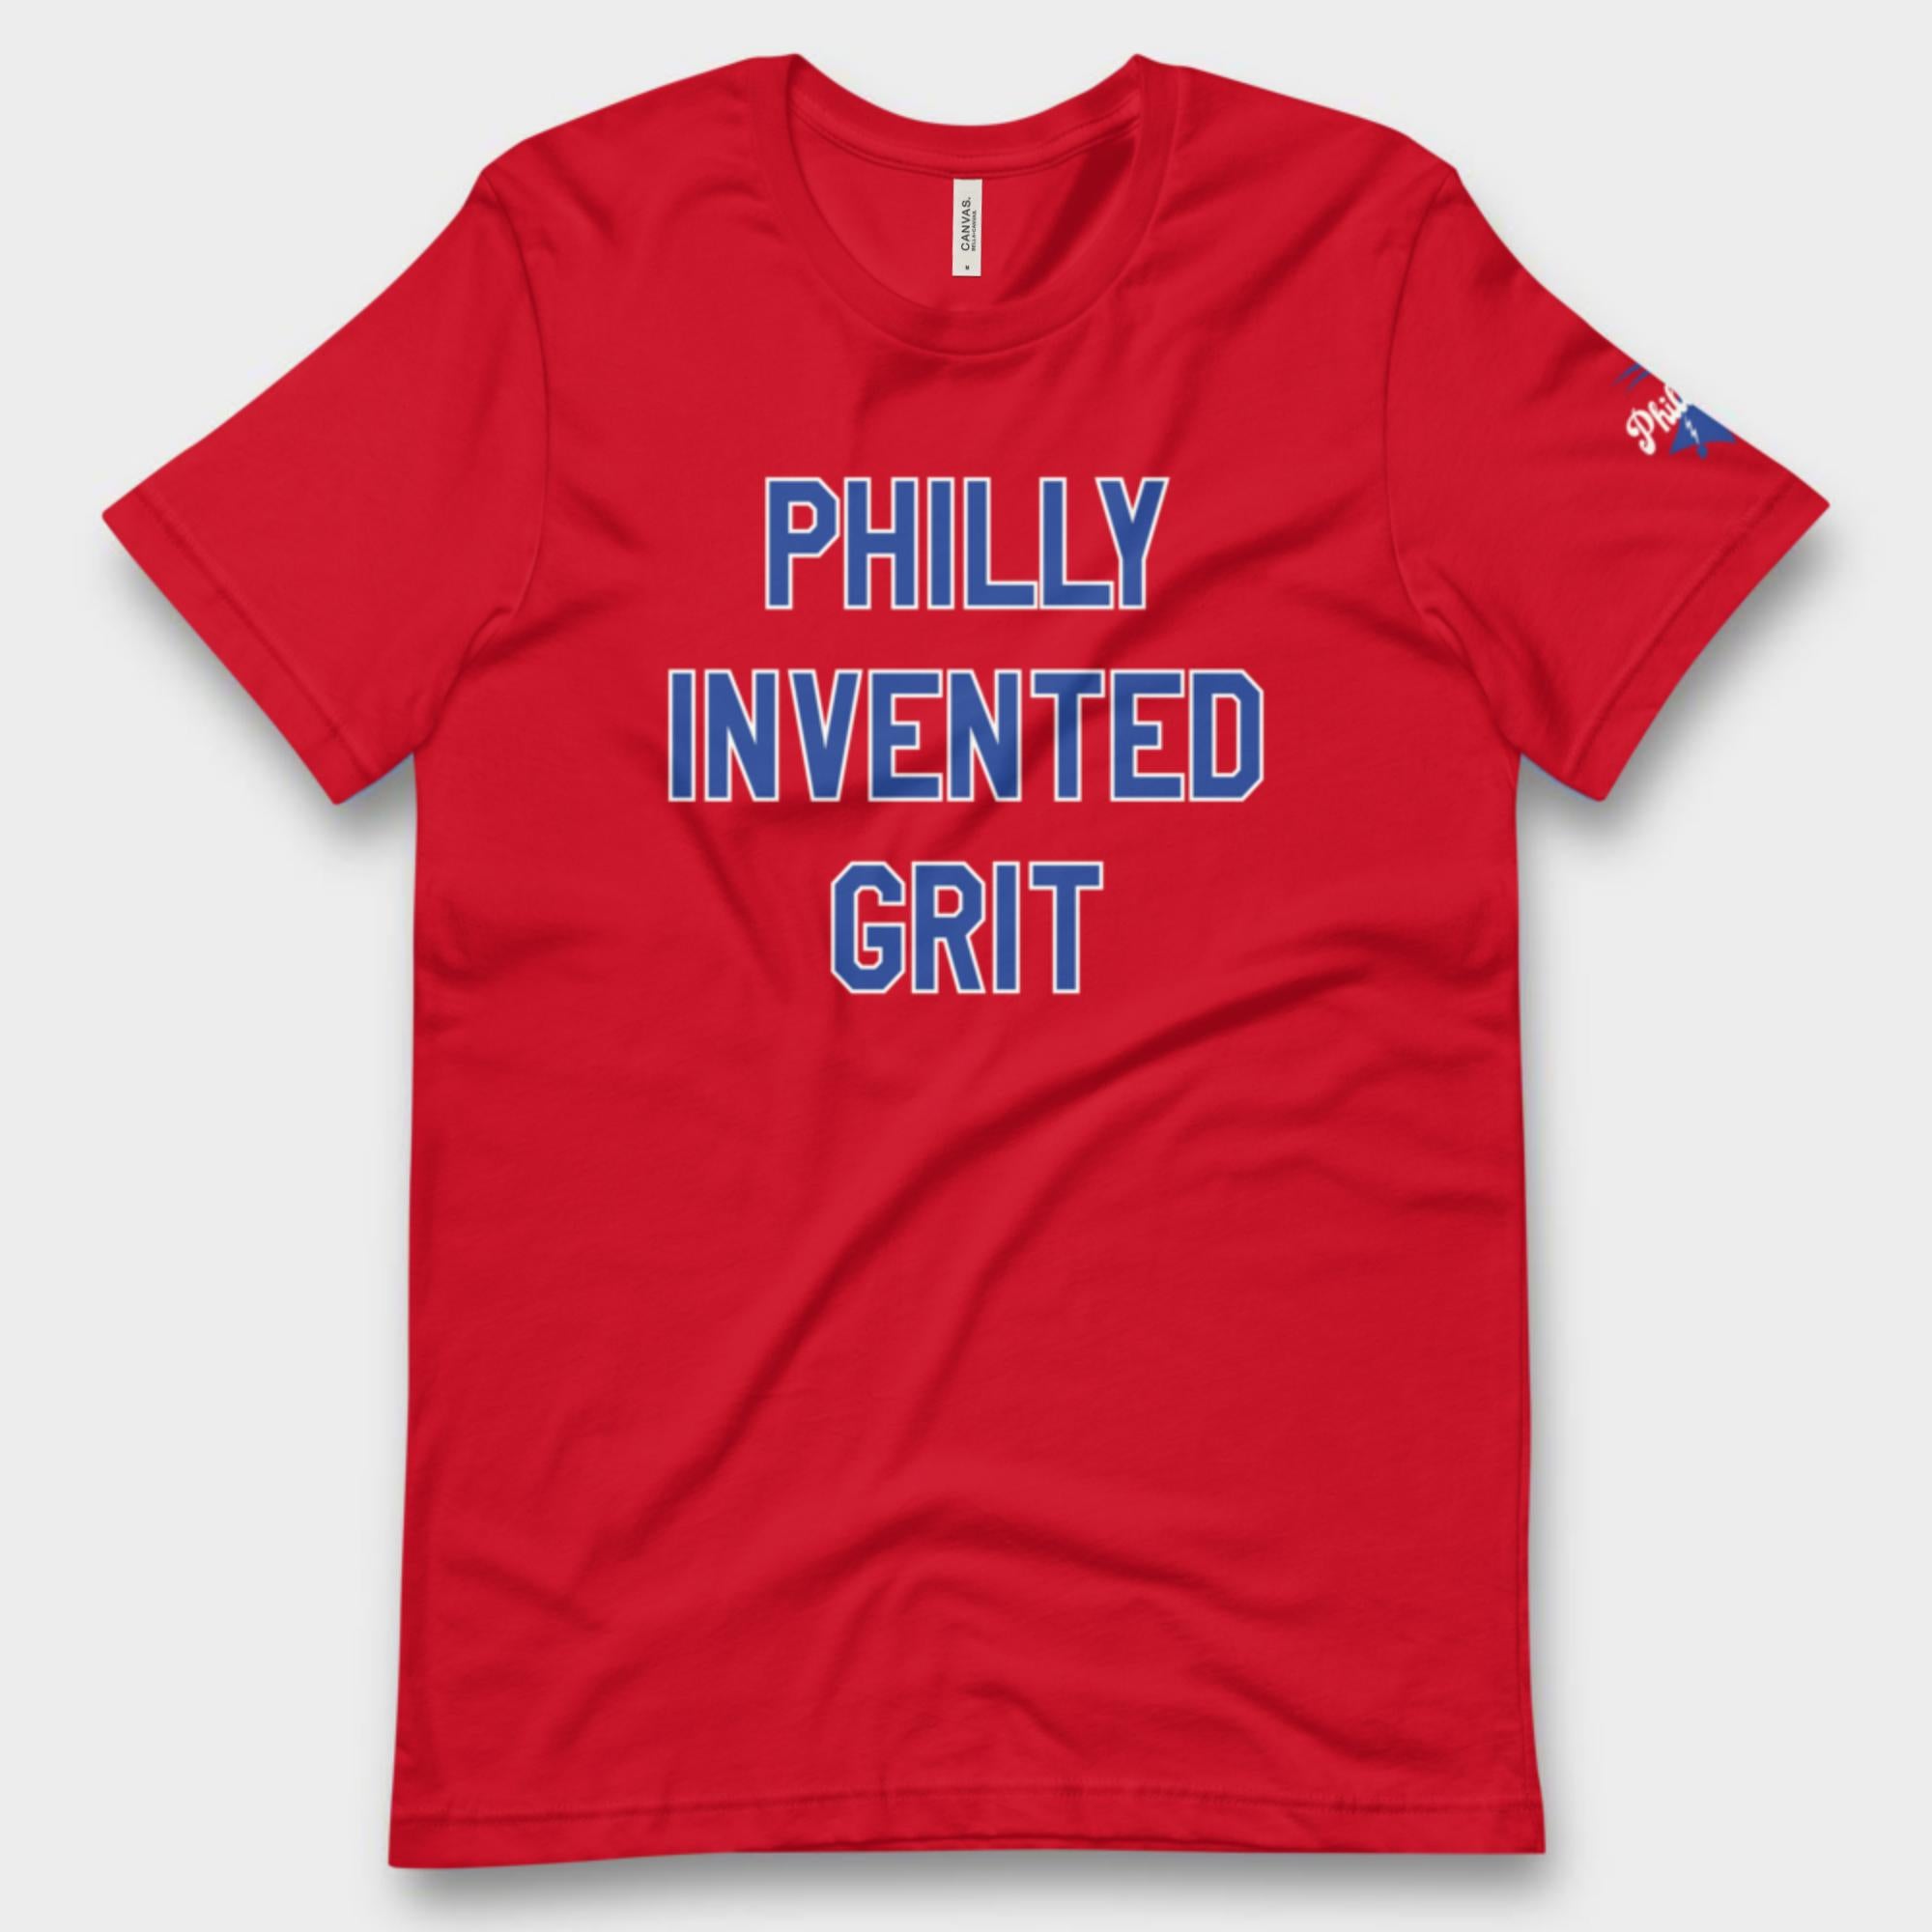 "Philly Invented Grit" Tee